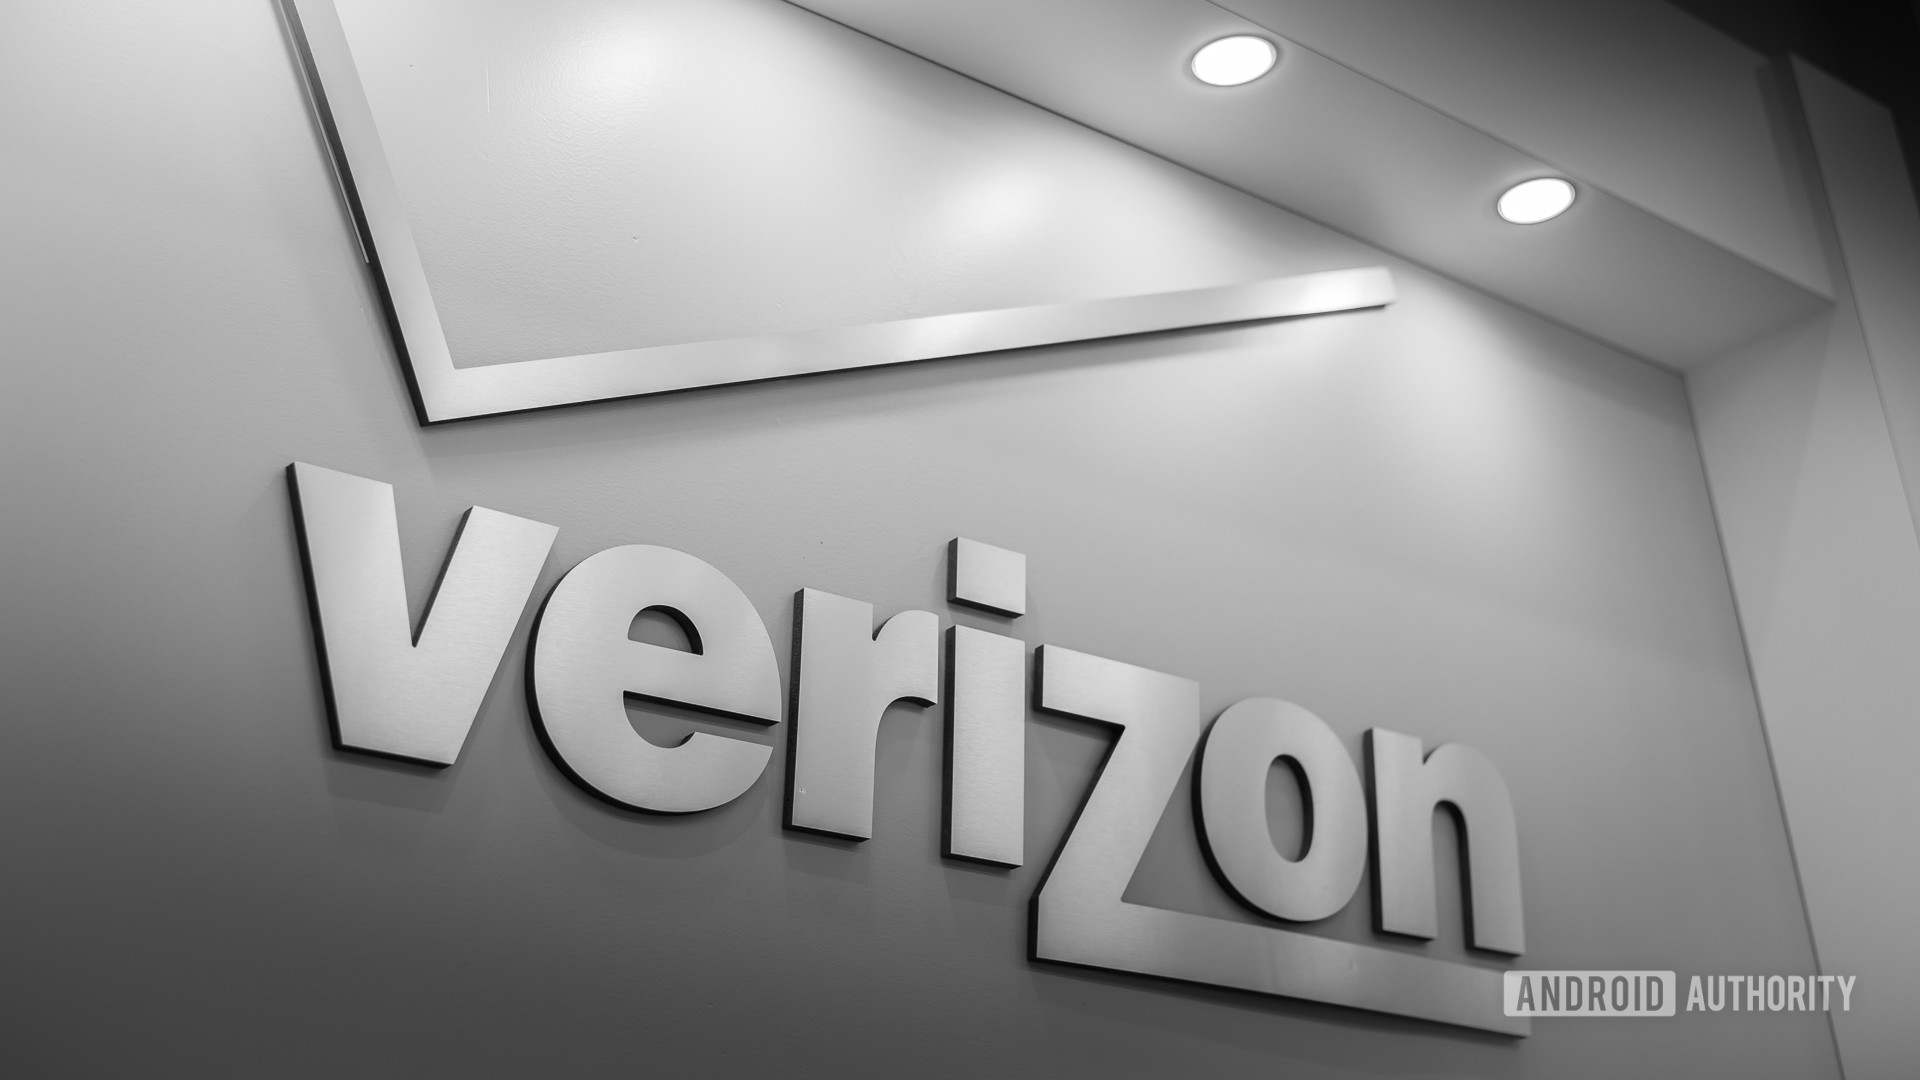 Verizon provides services to first responders.